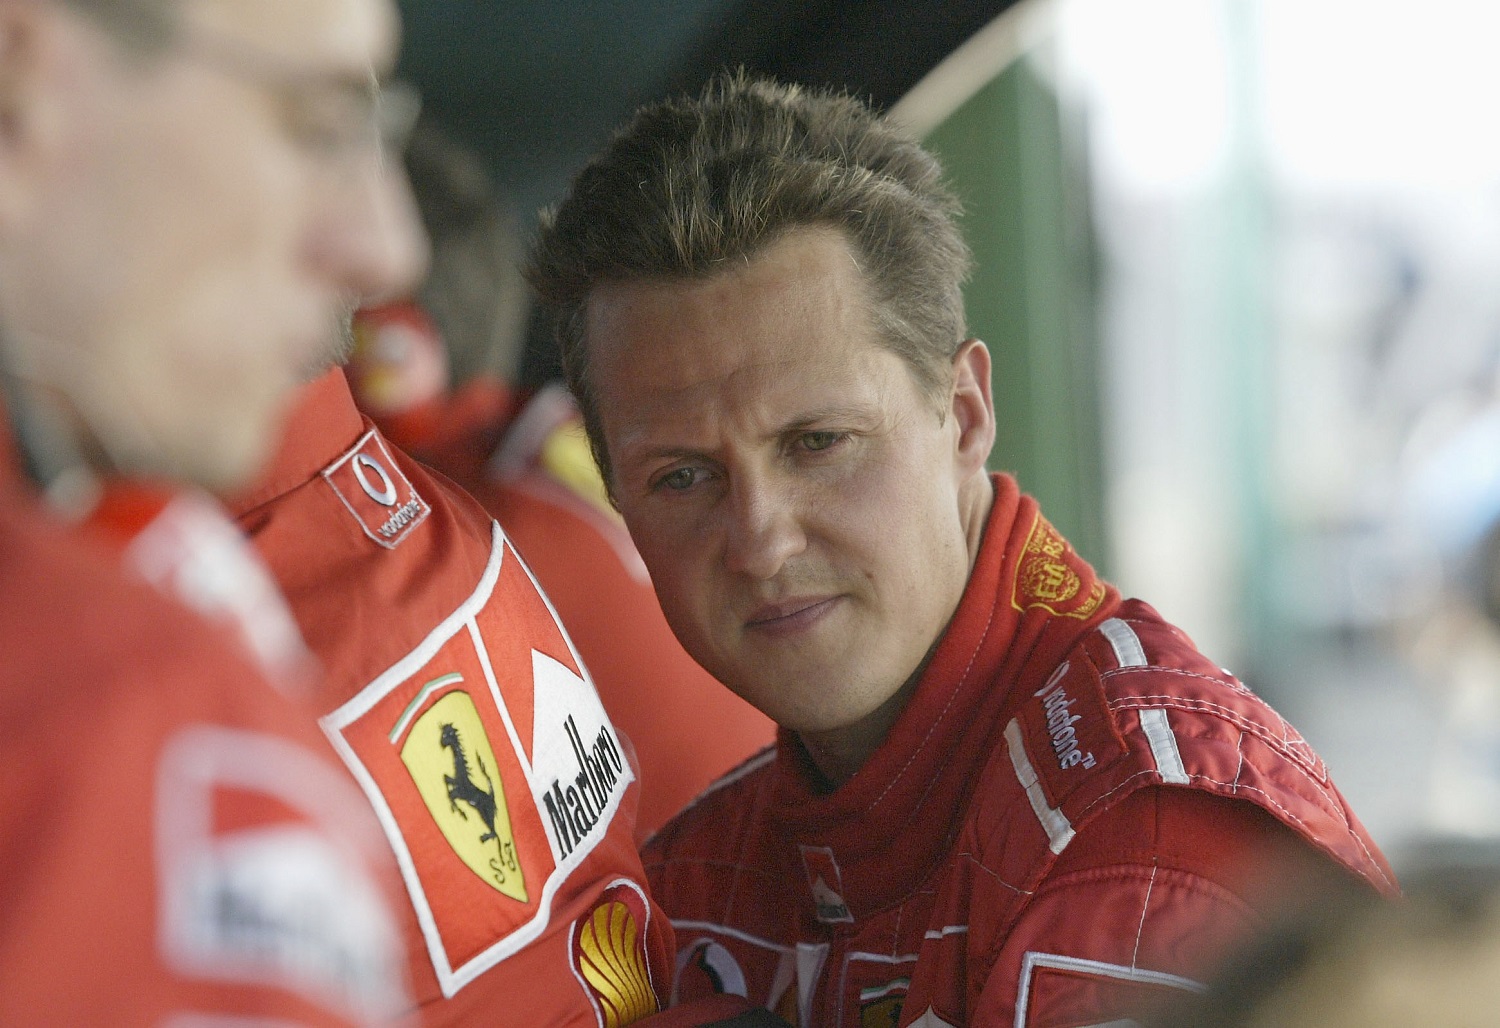 Michael Schumacher of Germany and Ferrari on the pit wall during qualifying for the Formula 1 Hungarian Grand Prix on Aug. 23, 2003.